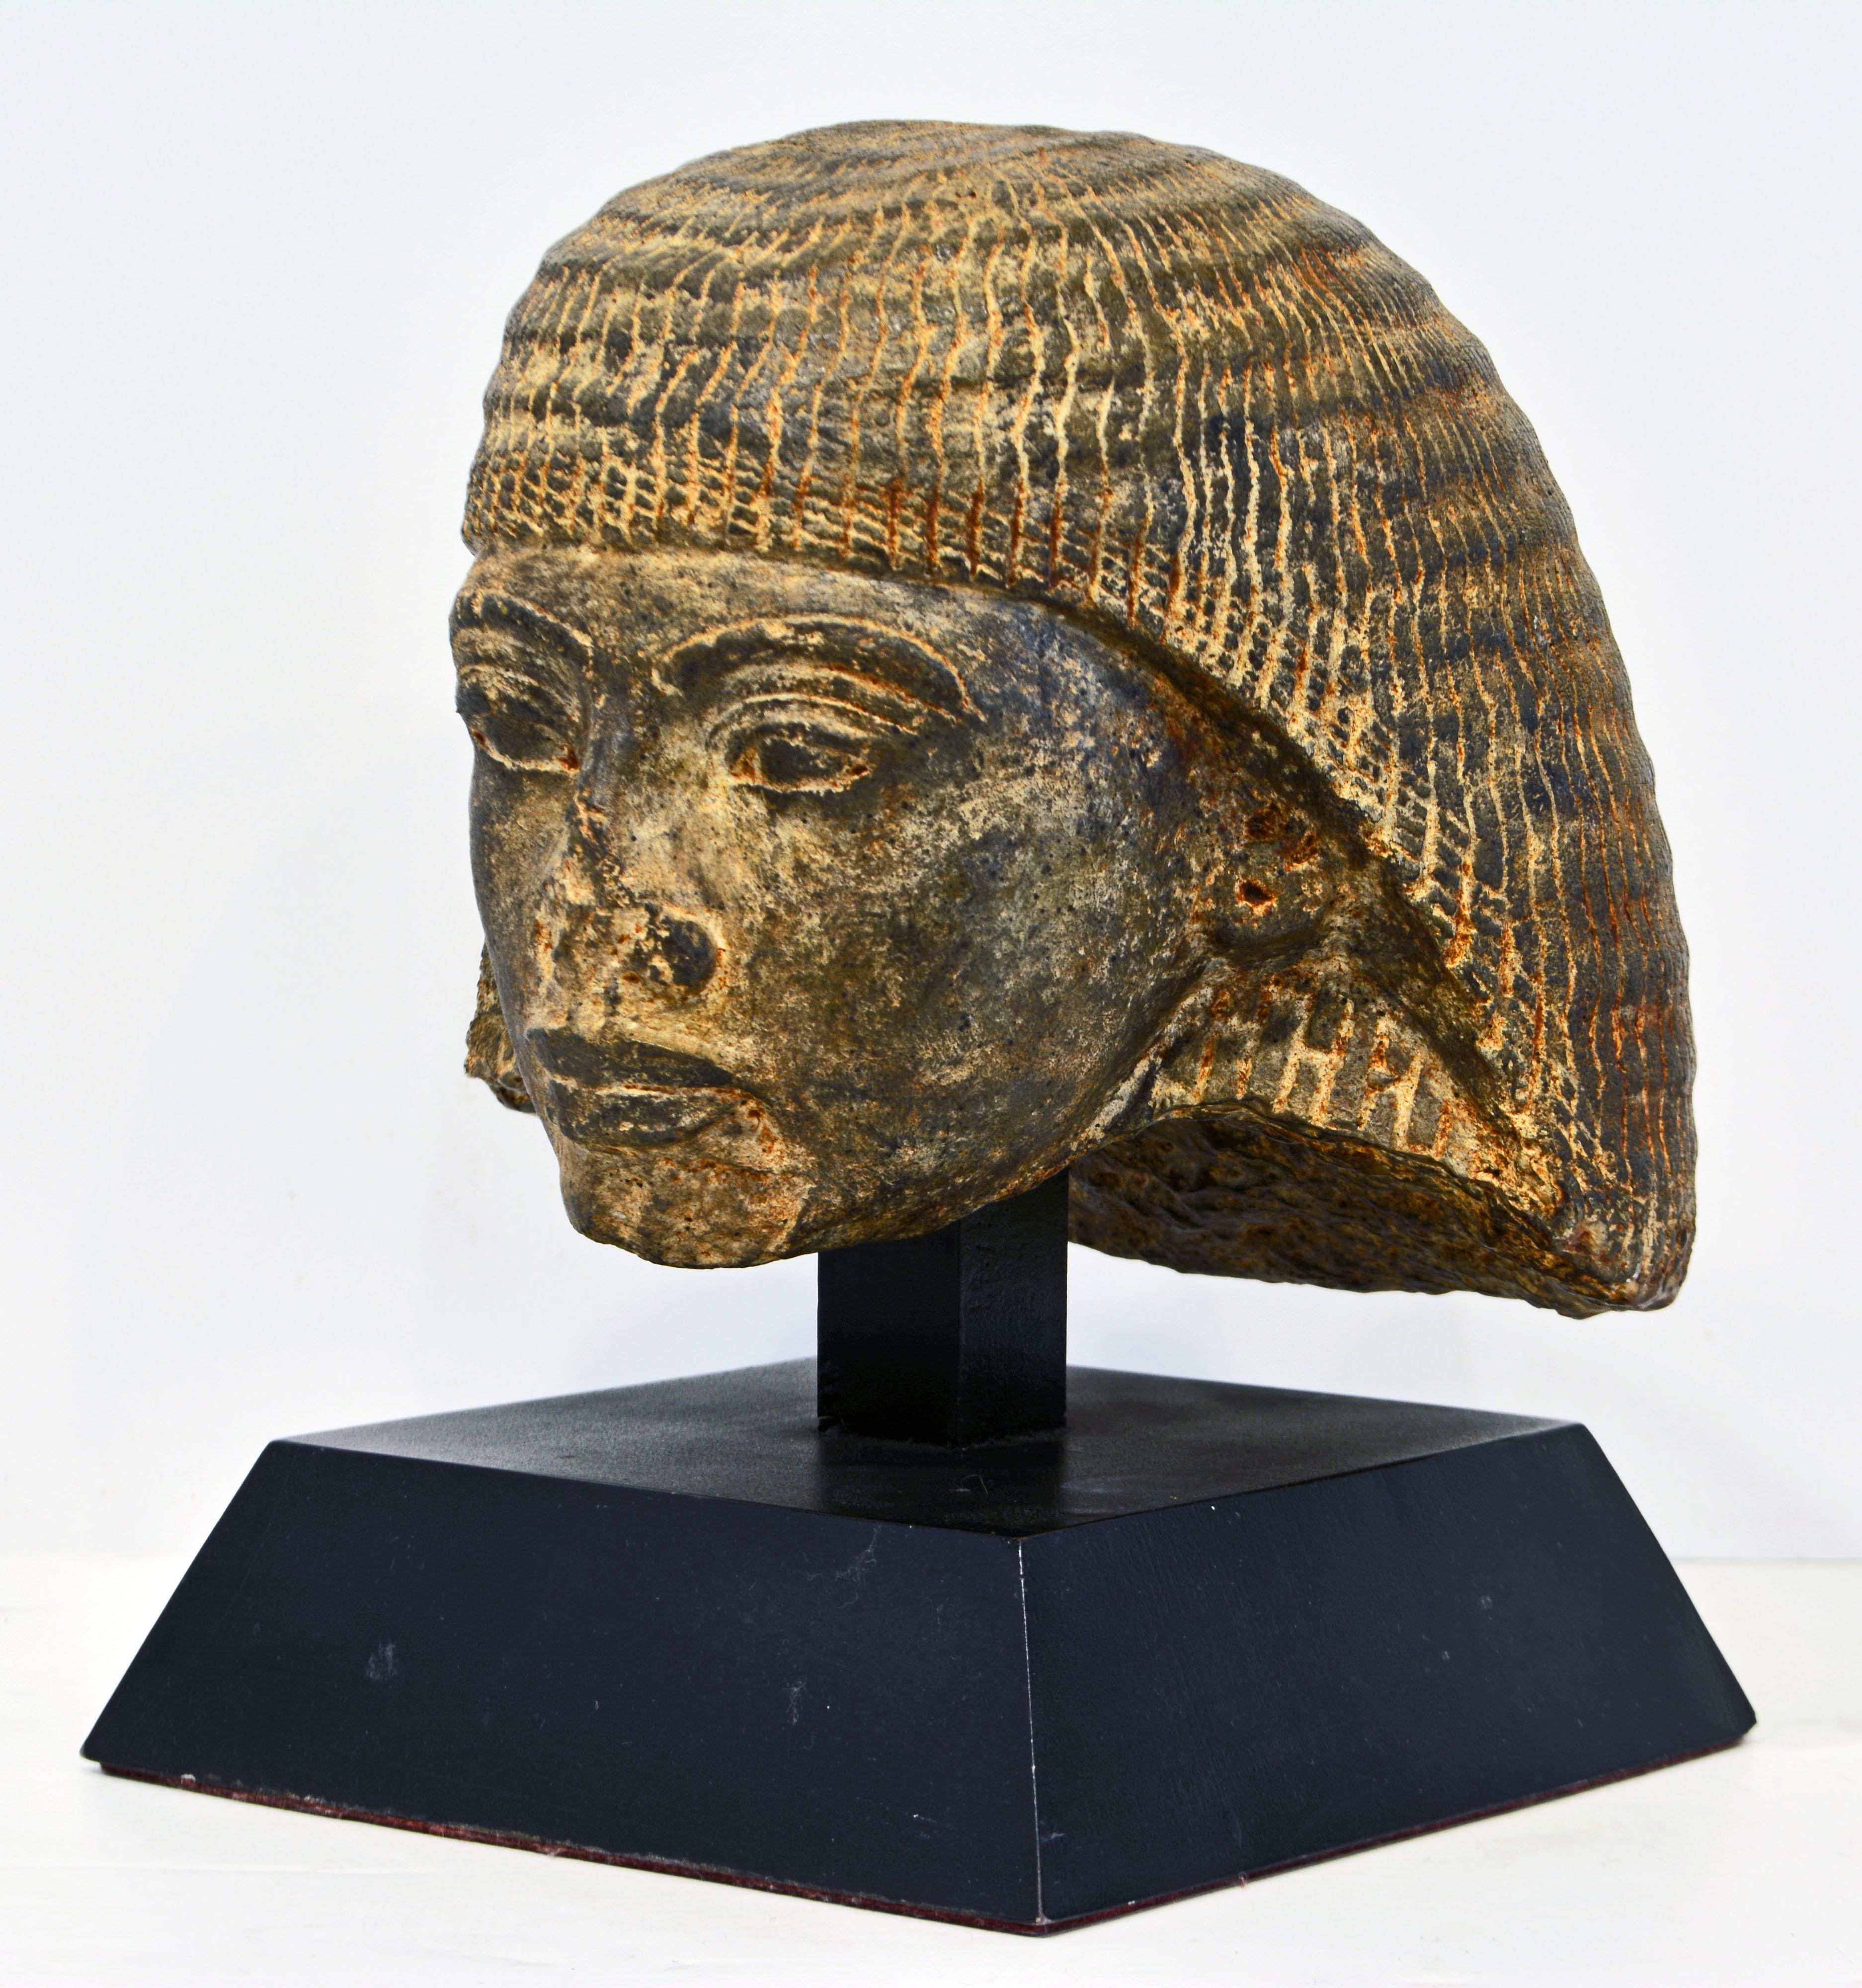 This head bust depicts the founder of the 19th Dynasty in ancient Egypt also known as Paramessu, 20th century. The original is held by the Boston Museum of Fine Arts, and there is reason to believe, that this high quality stone replica may be made